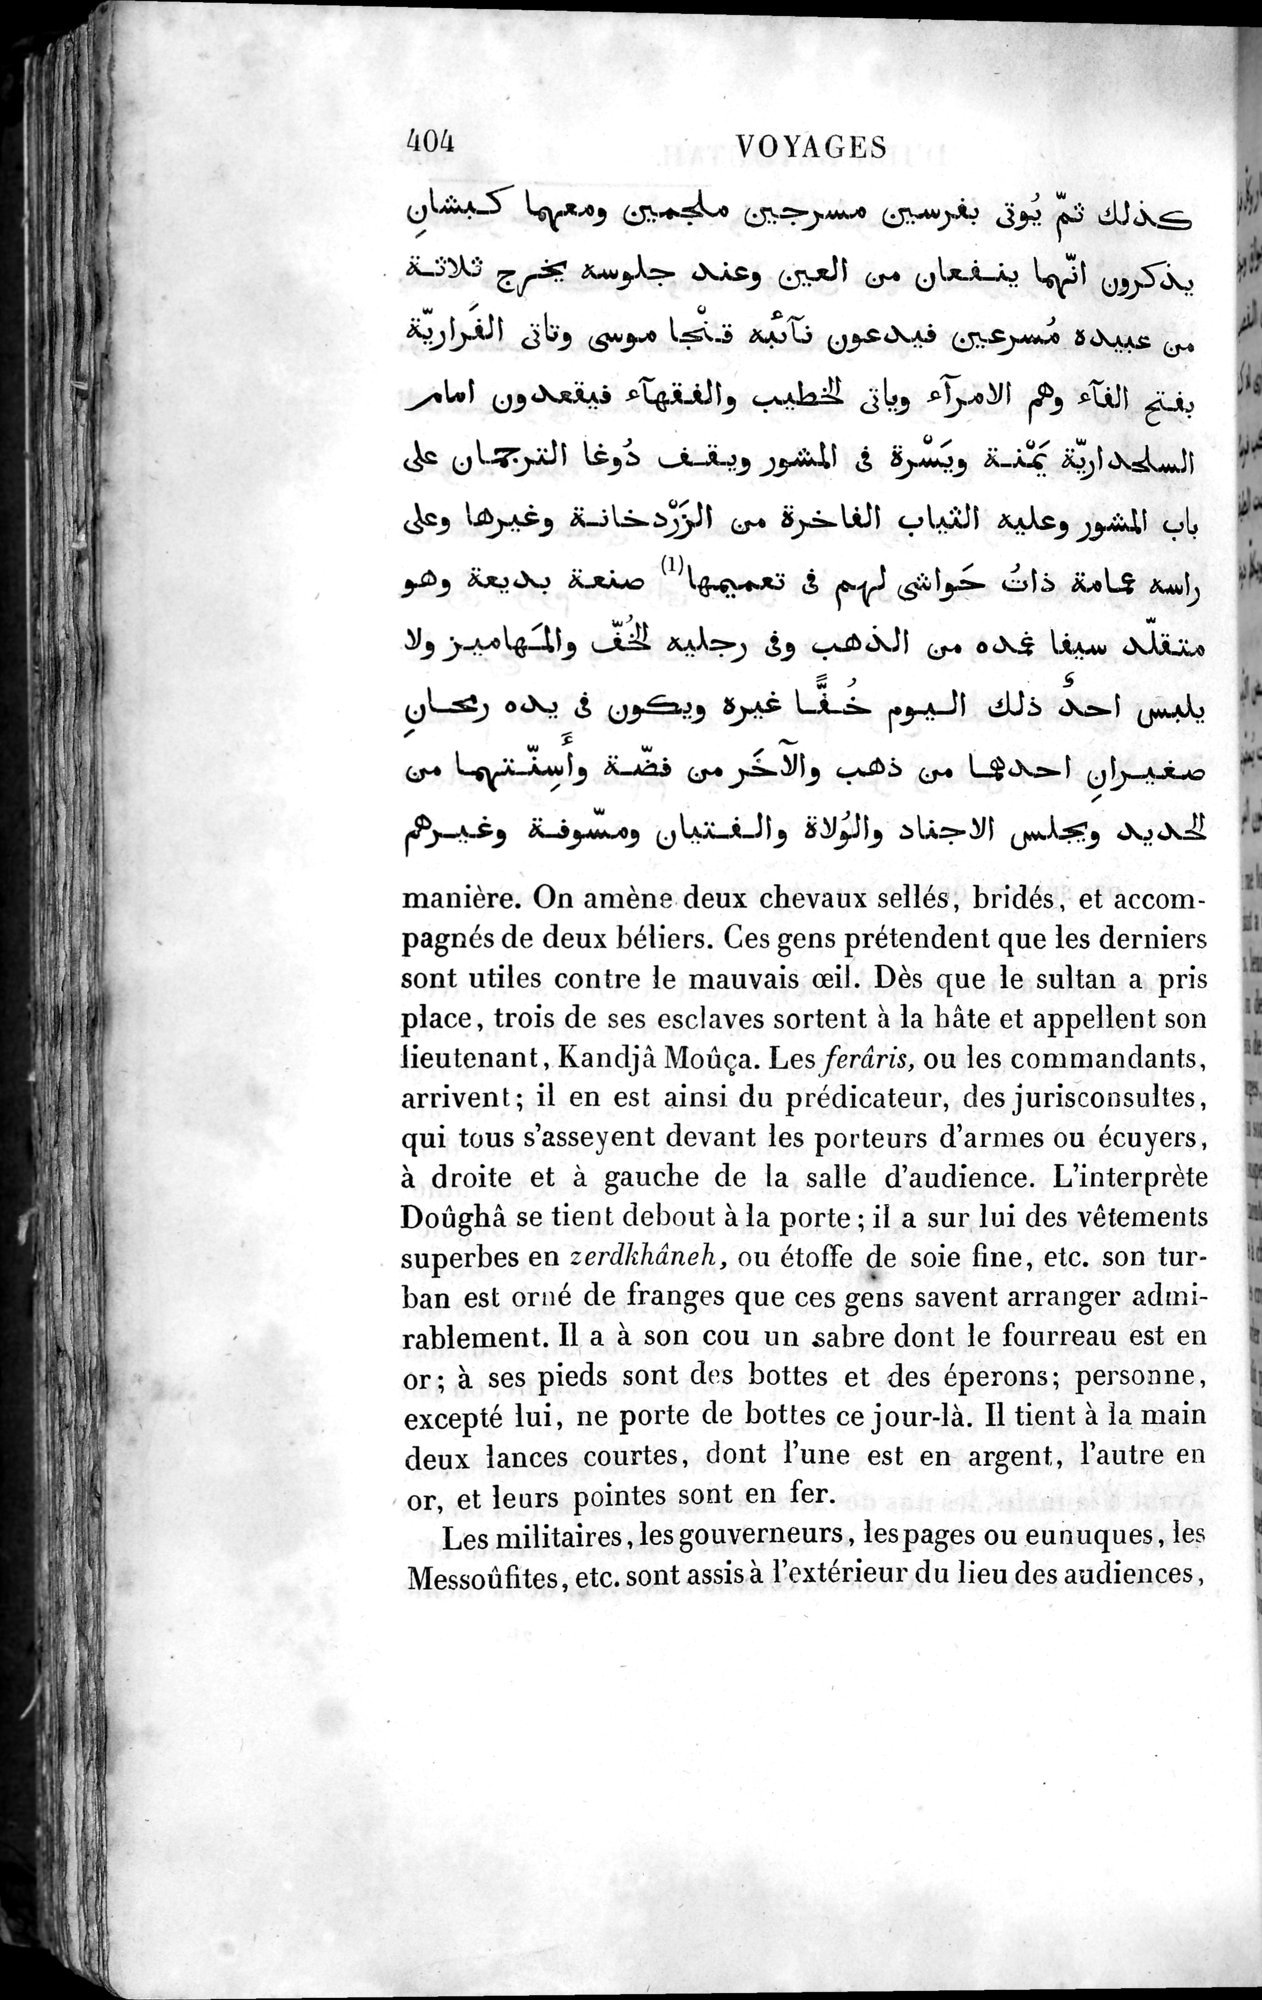 Voyages d'Ibn Batoutah : vol.4 / Page 416 (Grayscale High Resolution Image)